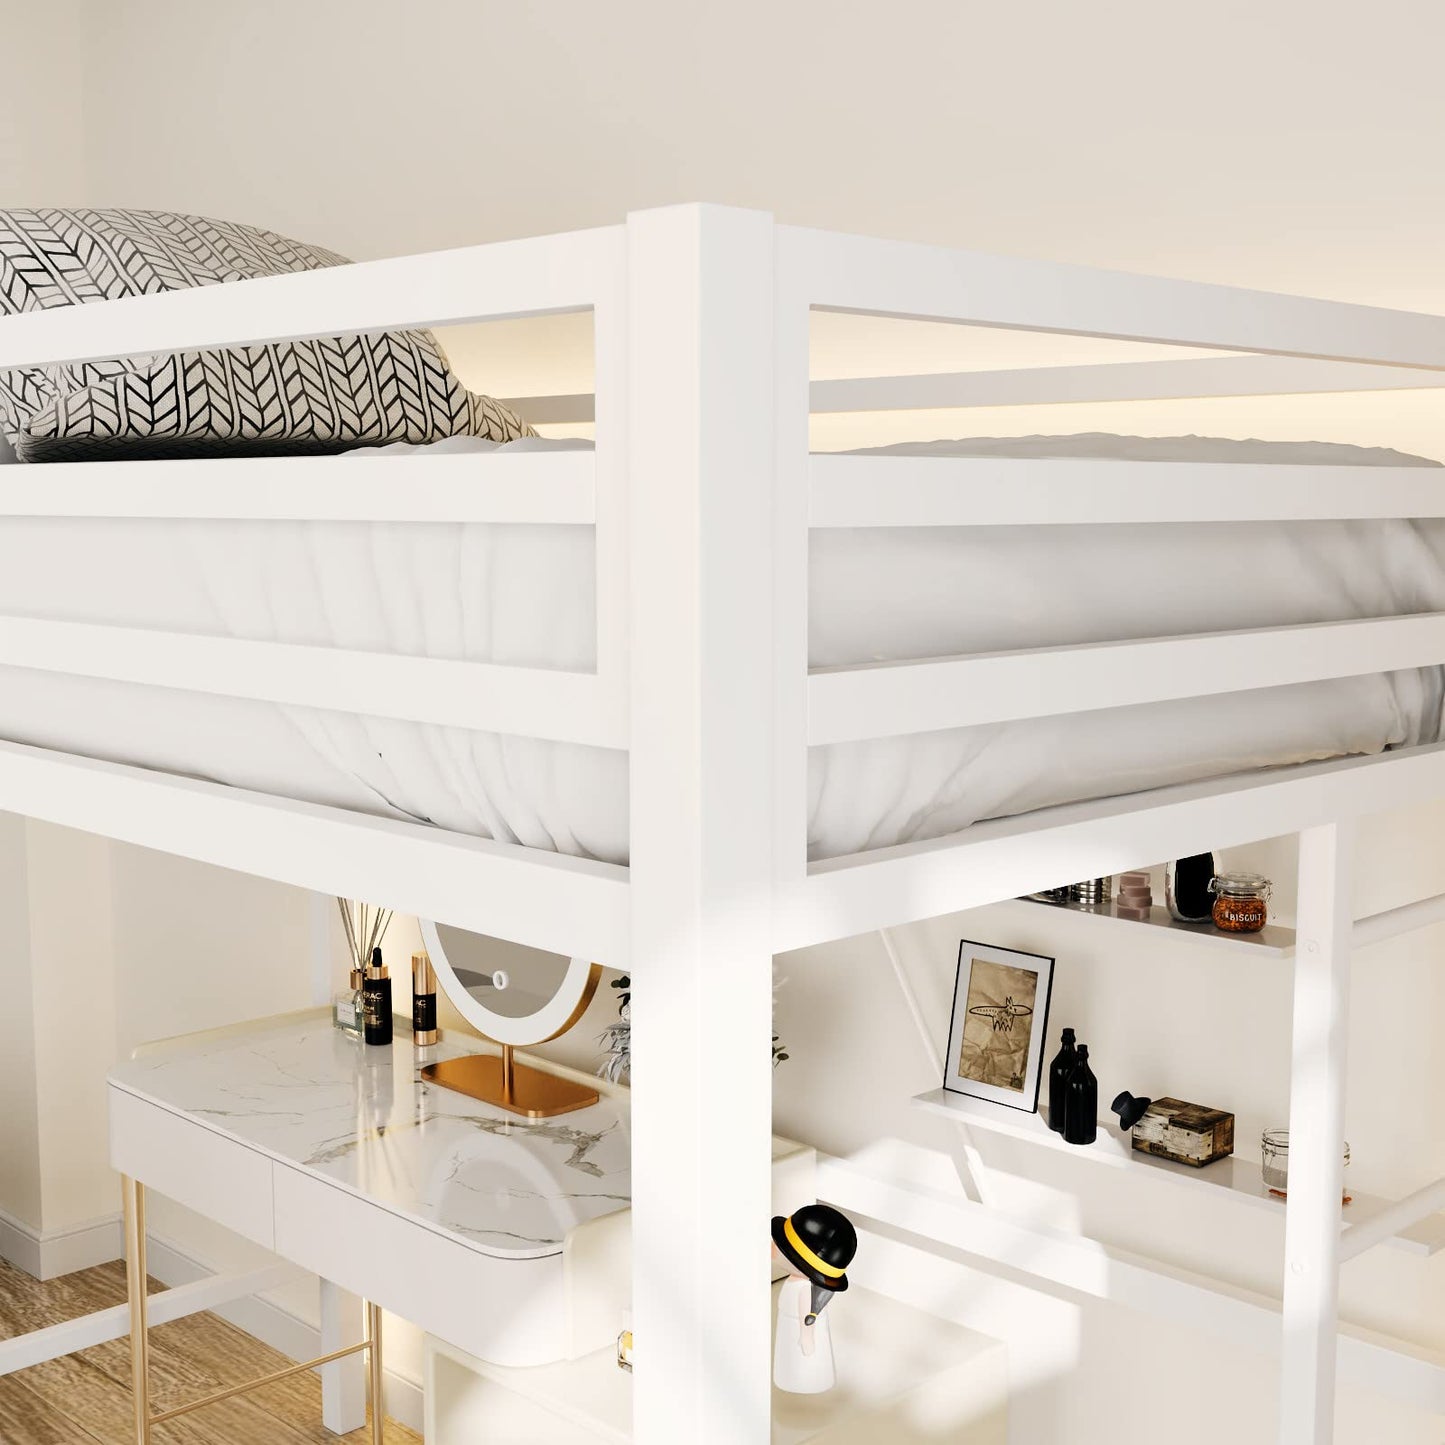 ikalido Twin Size Loft Bed, Multifunctional Metal Twin Bed with Safety Guard & Removable Ladder, Space-Saving Bed Frame for Small Bedroom, Matte White